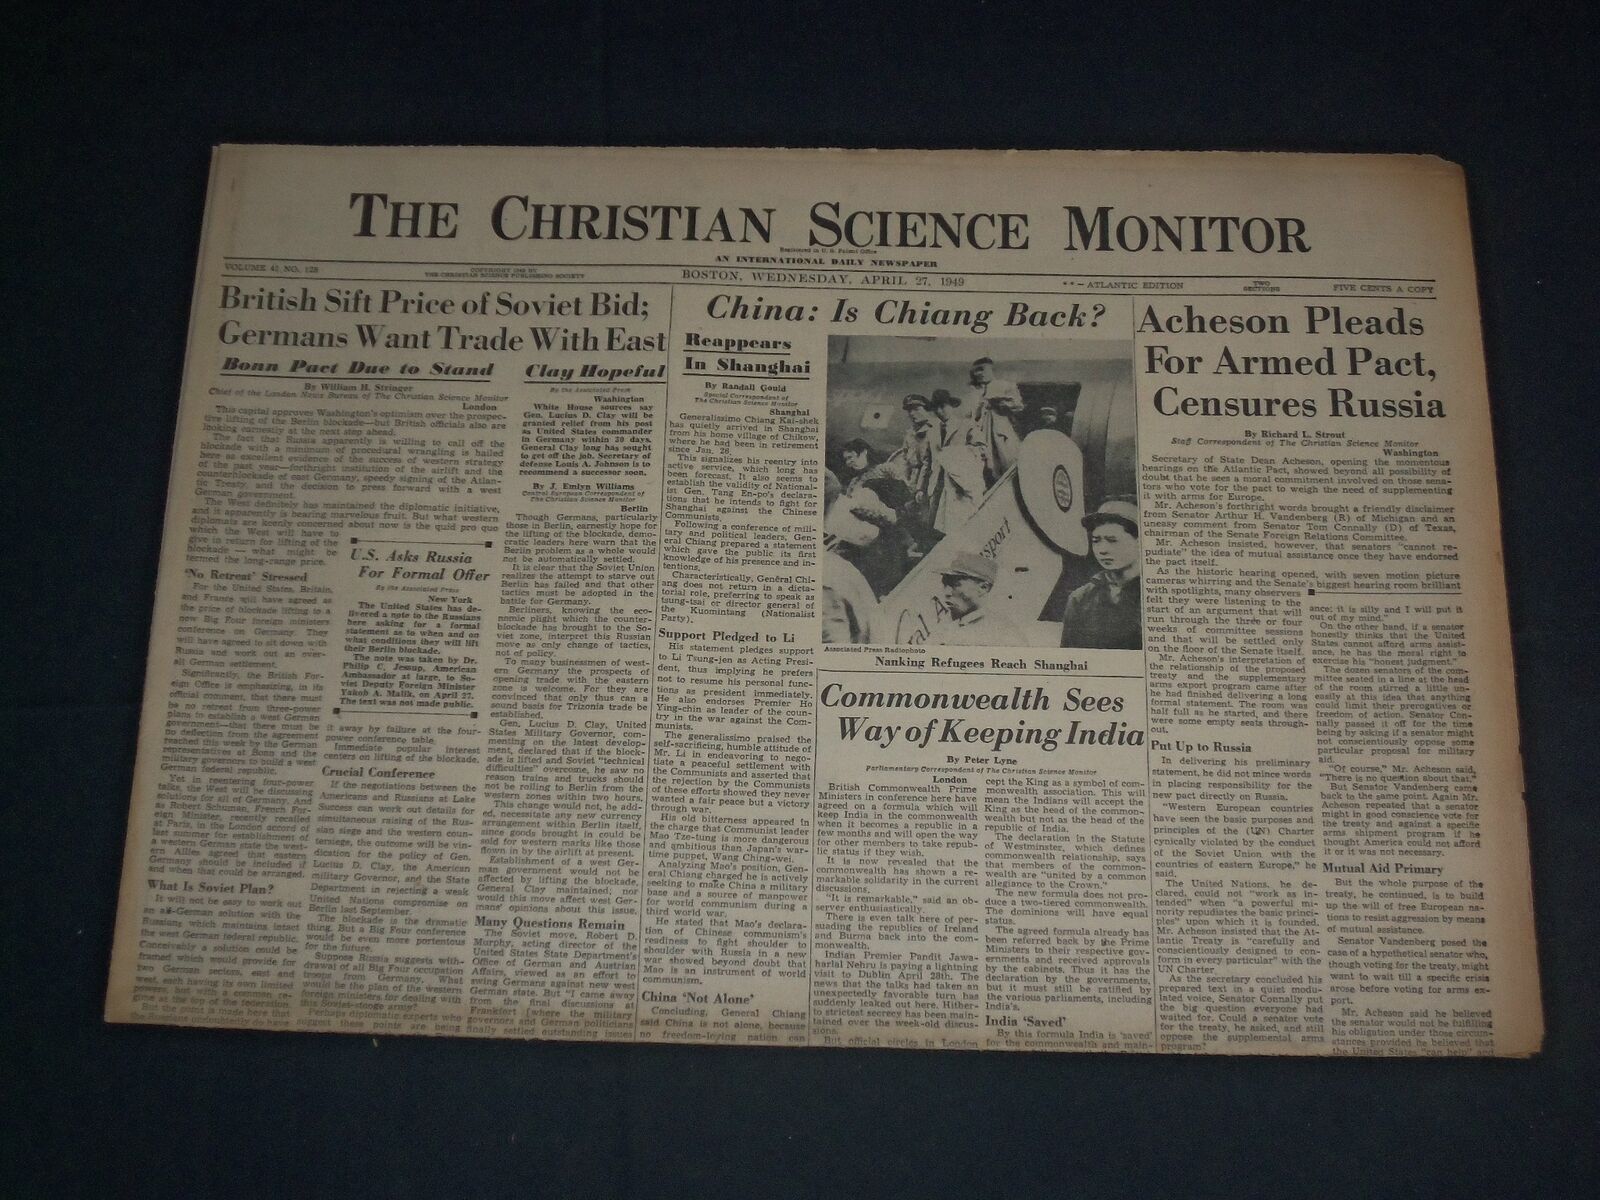 1949 APRIL 27 THE CHRISTIAN SCIENCE MONITOR NEWSPAPER - IS CHIANG BACK?- NP 3399